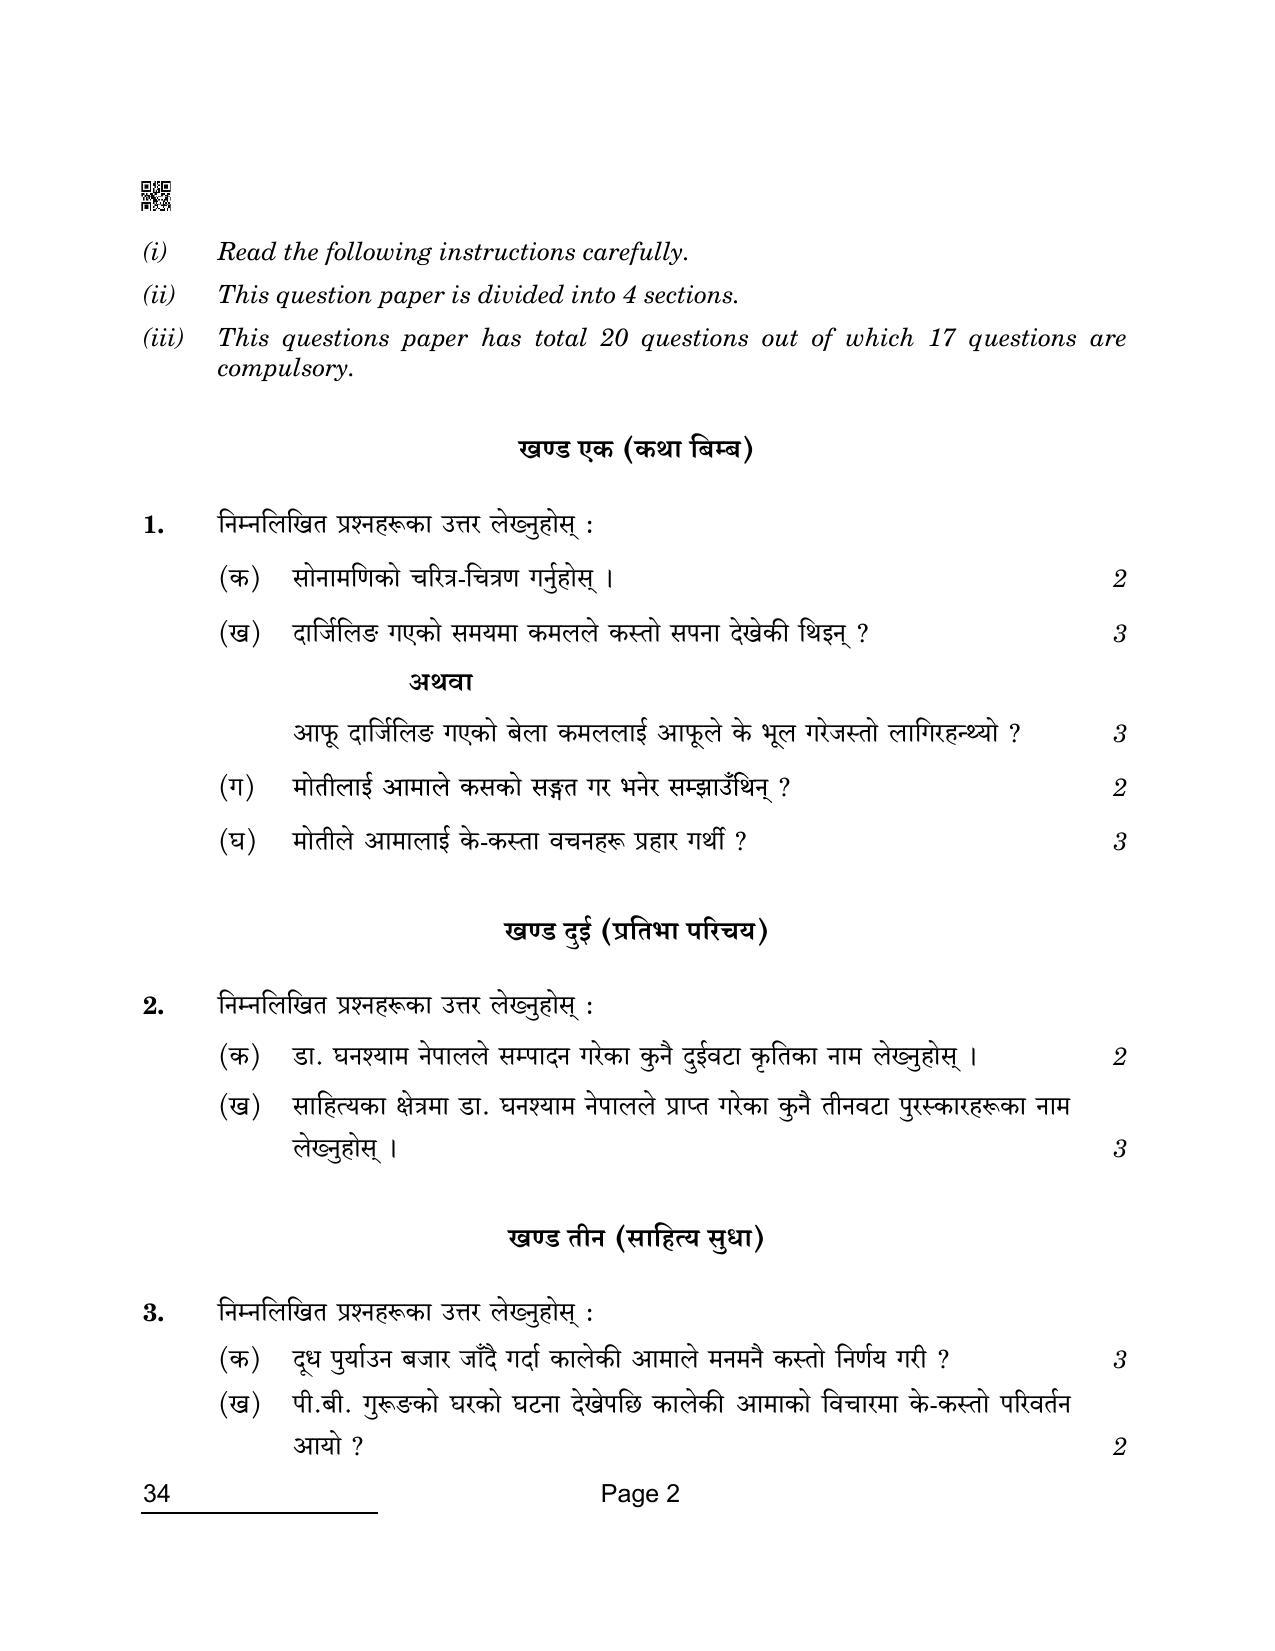 CBSE Class 10 17 Nepali 2022 Compartment Question Paper - Page 2